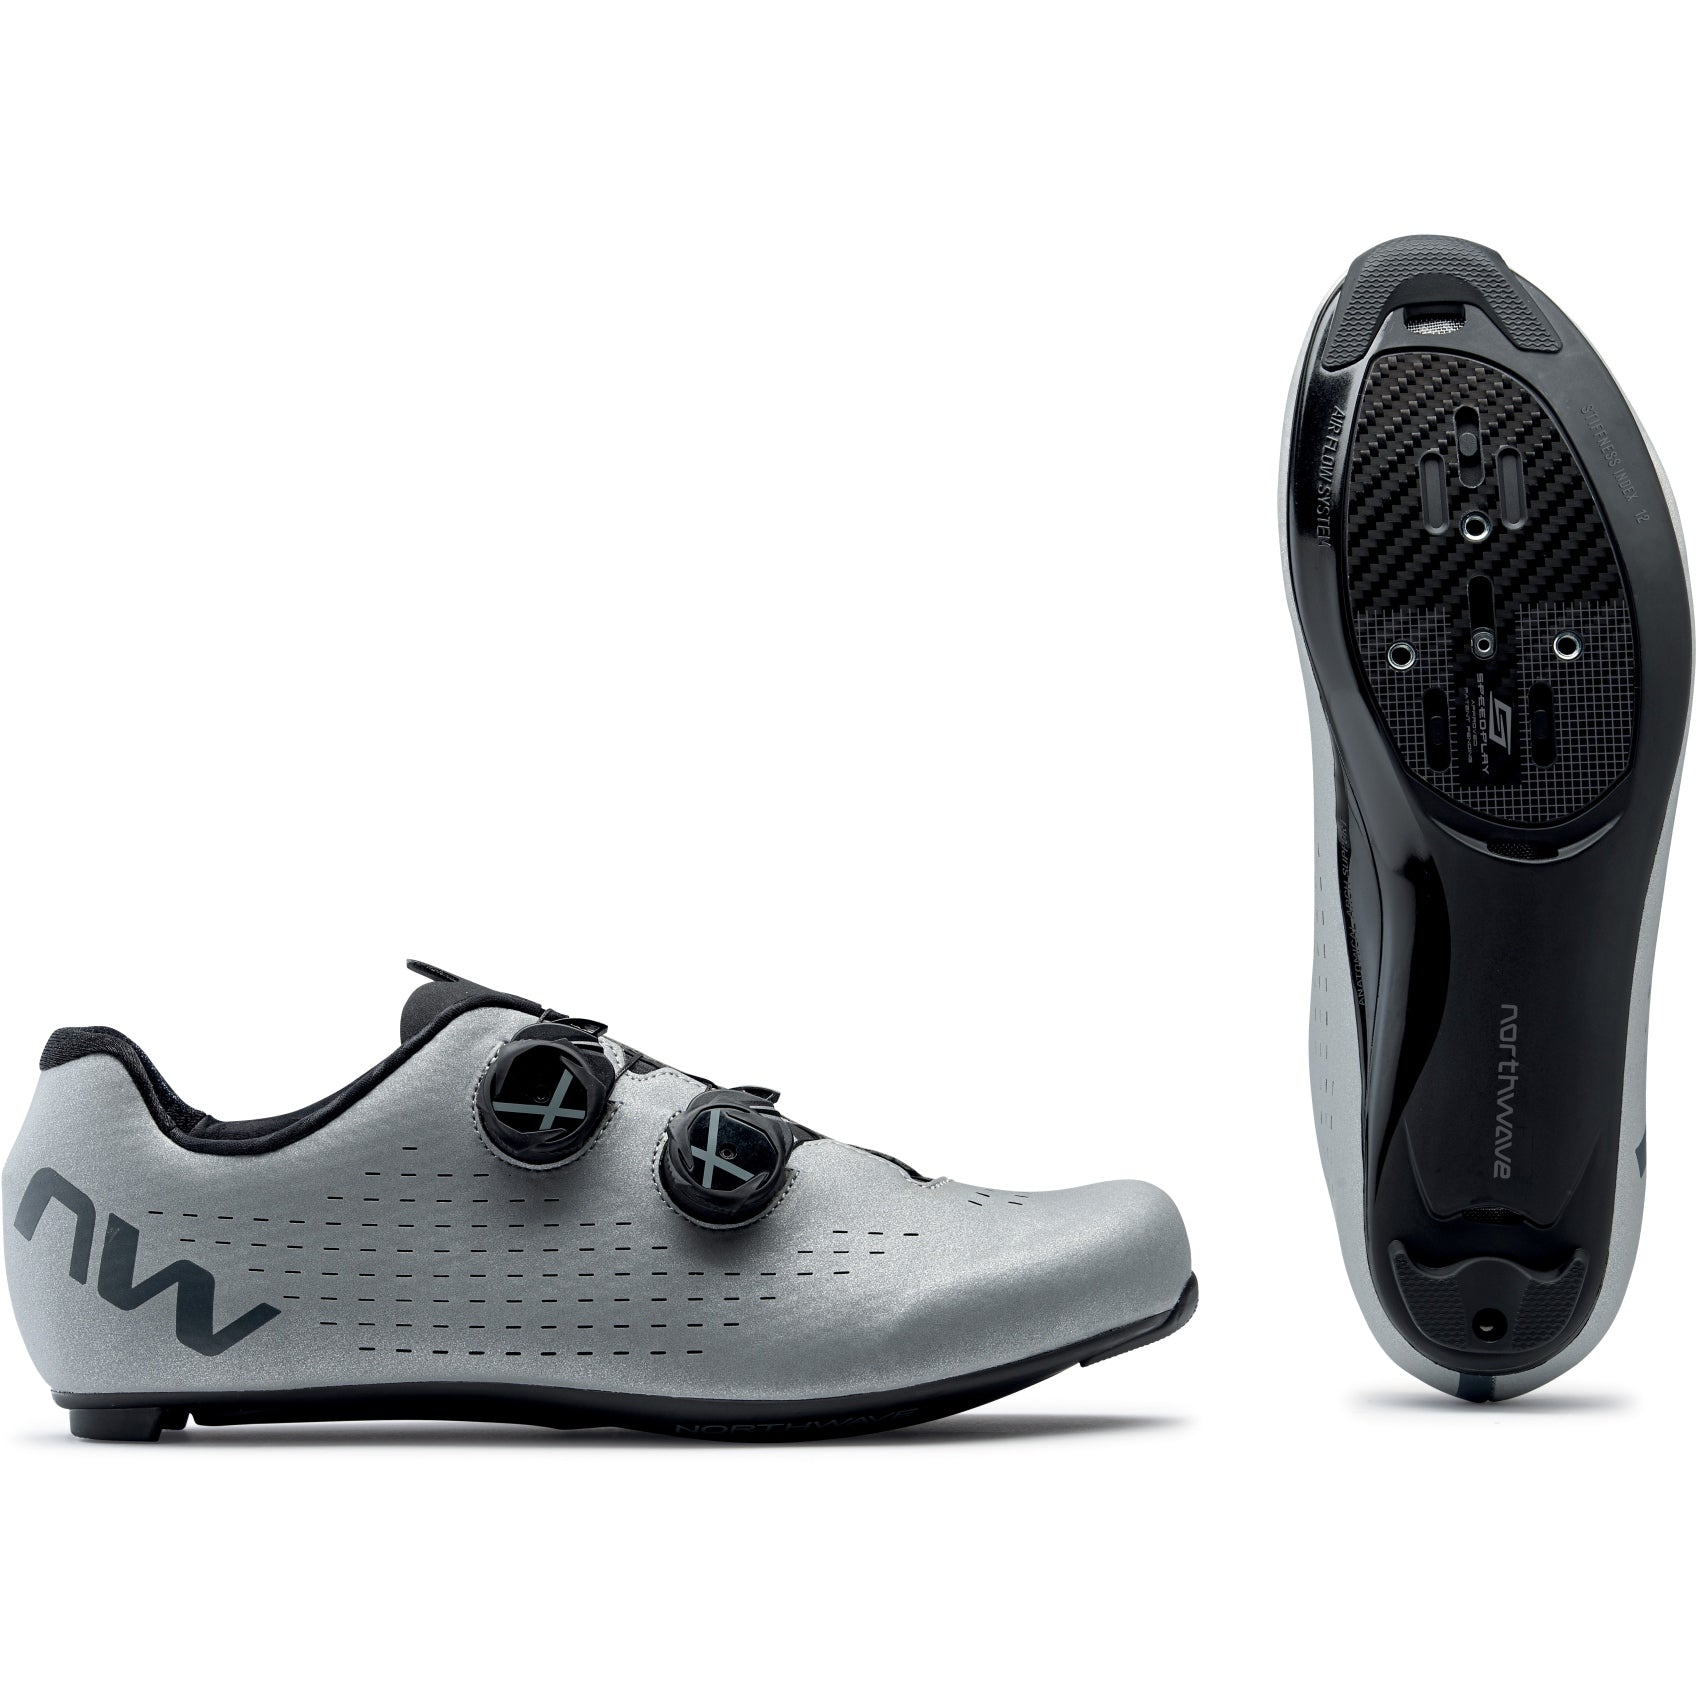 REVOLUTION 3 ROAD CYCLING SHOES